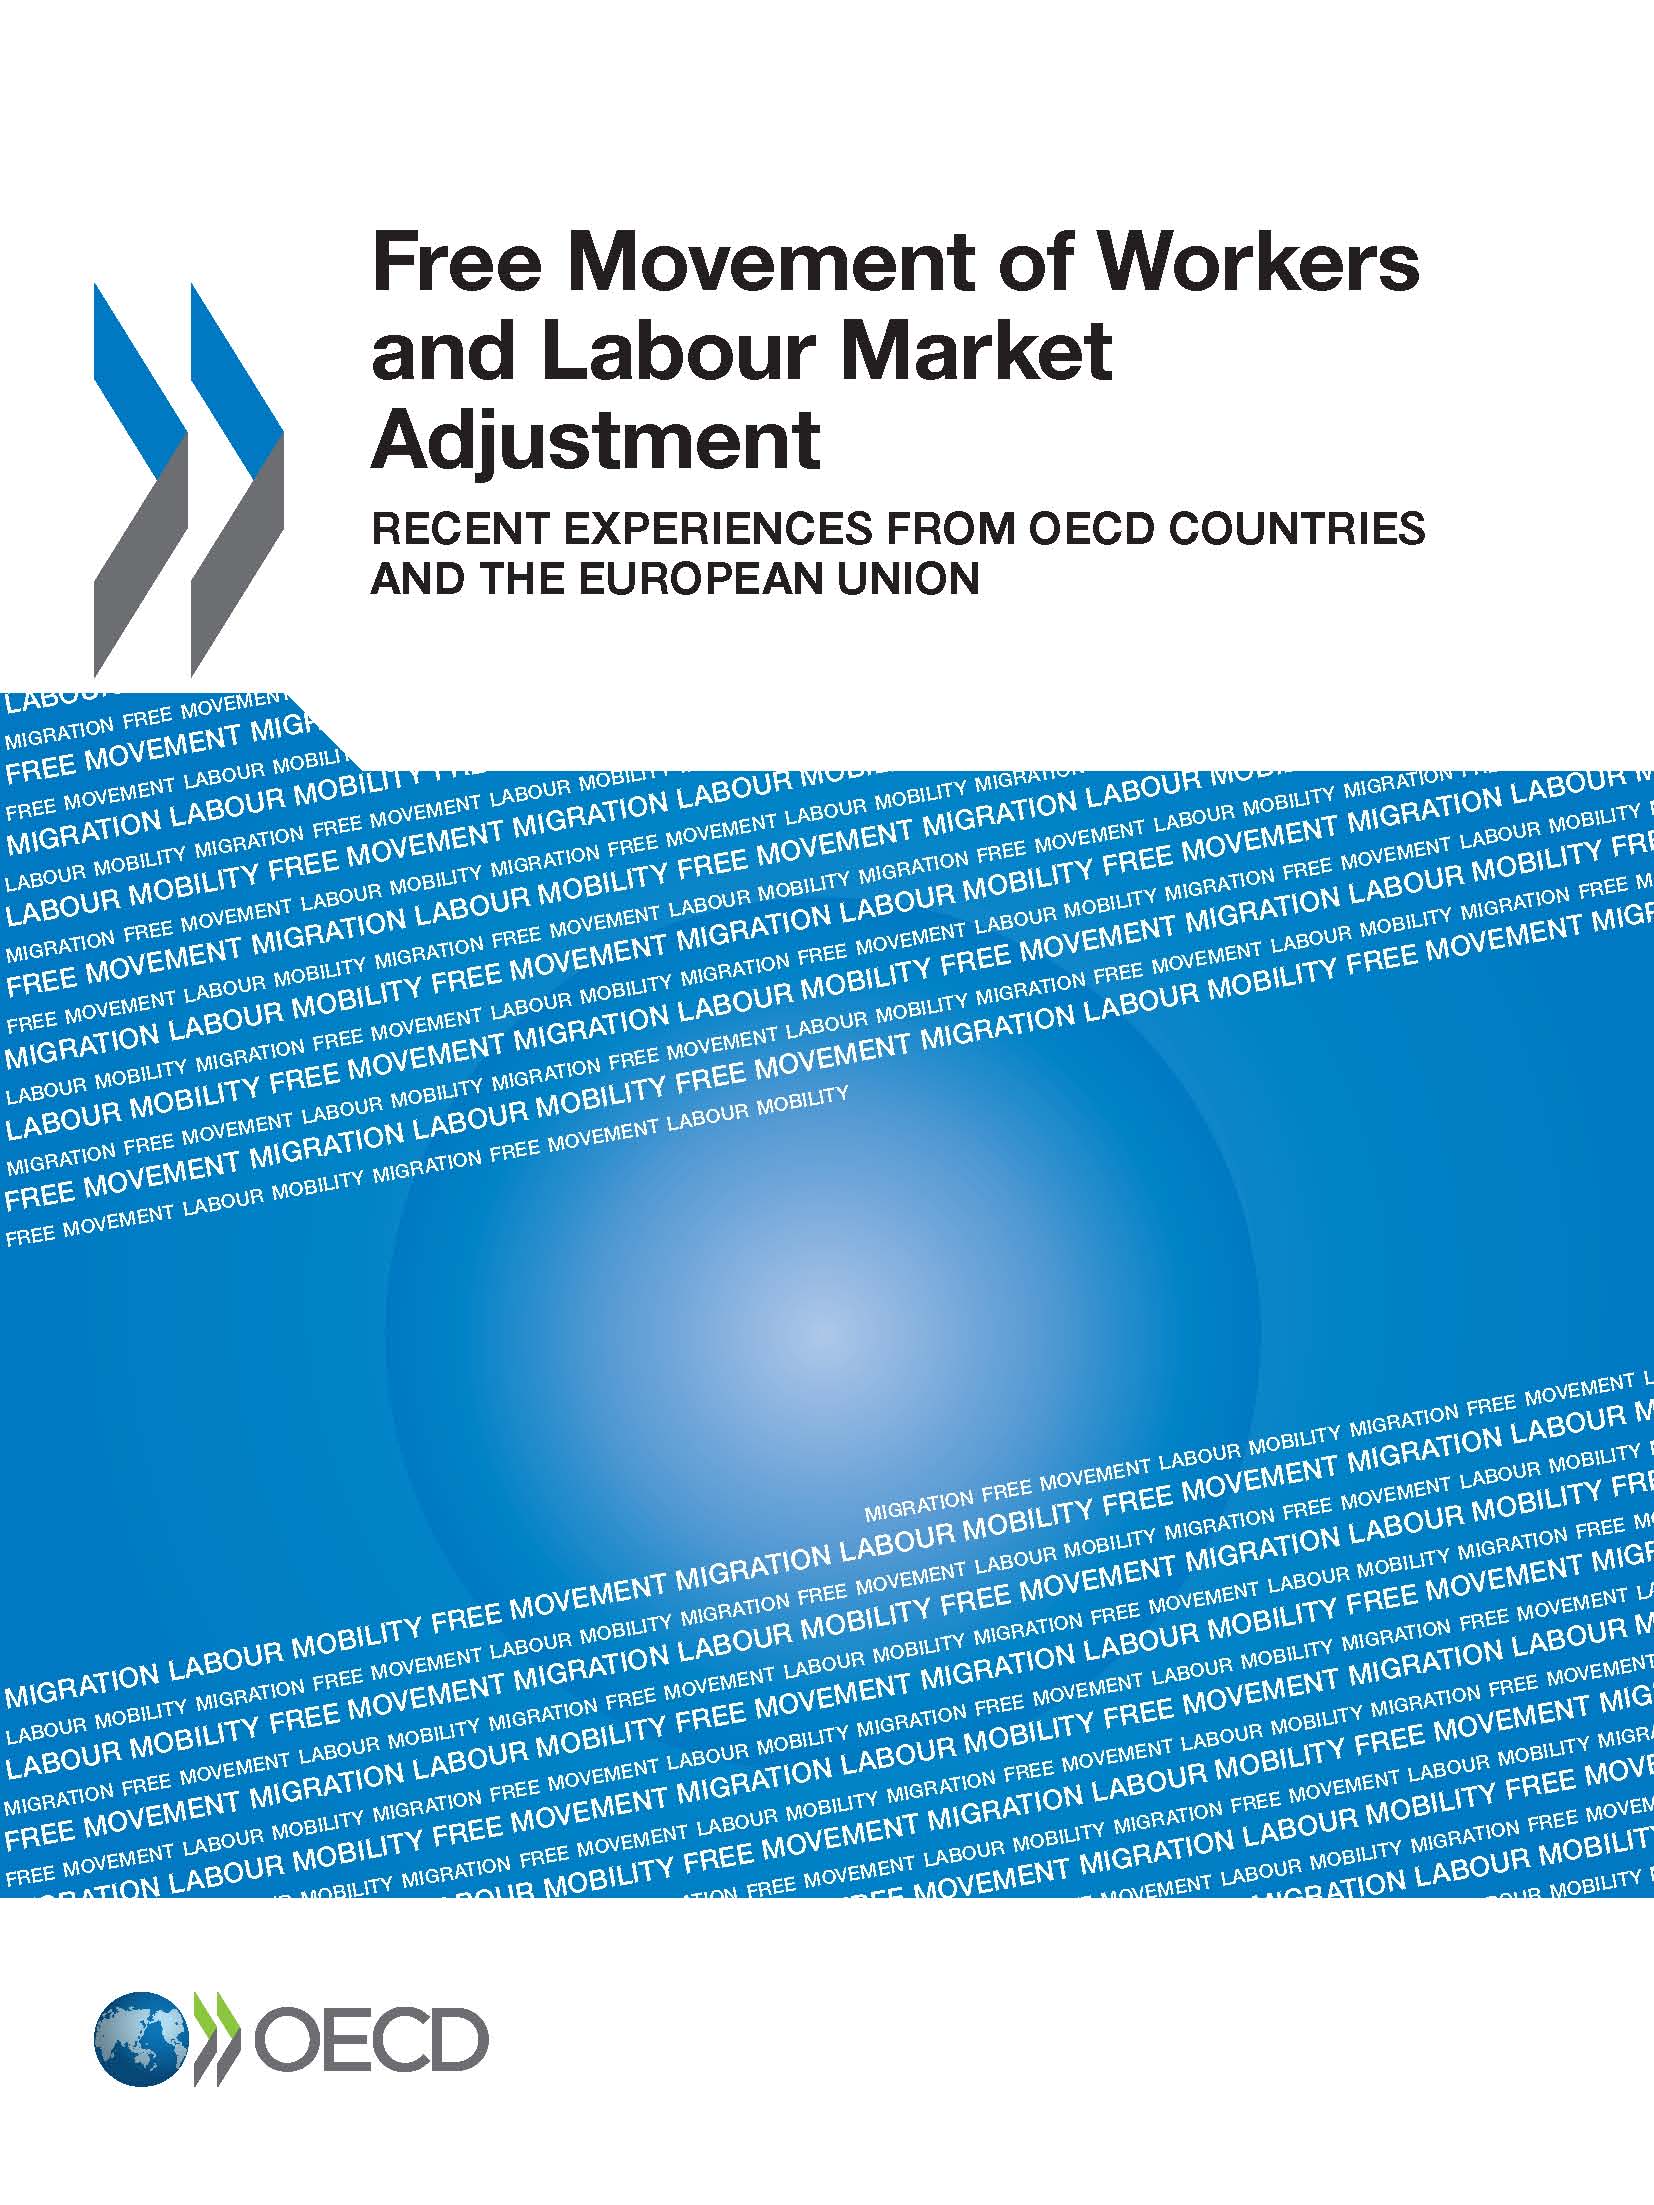 Free Movement of Workers and Labour Market Adjustment. Recent Experiences from OECD Countries and the European Union